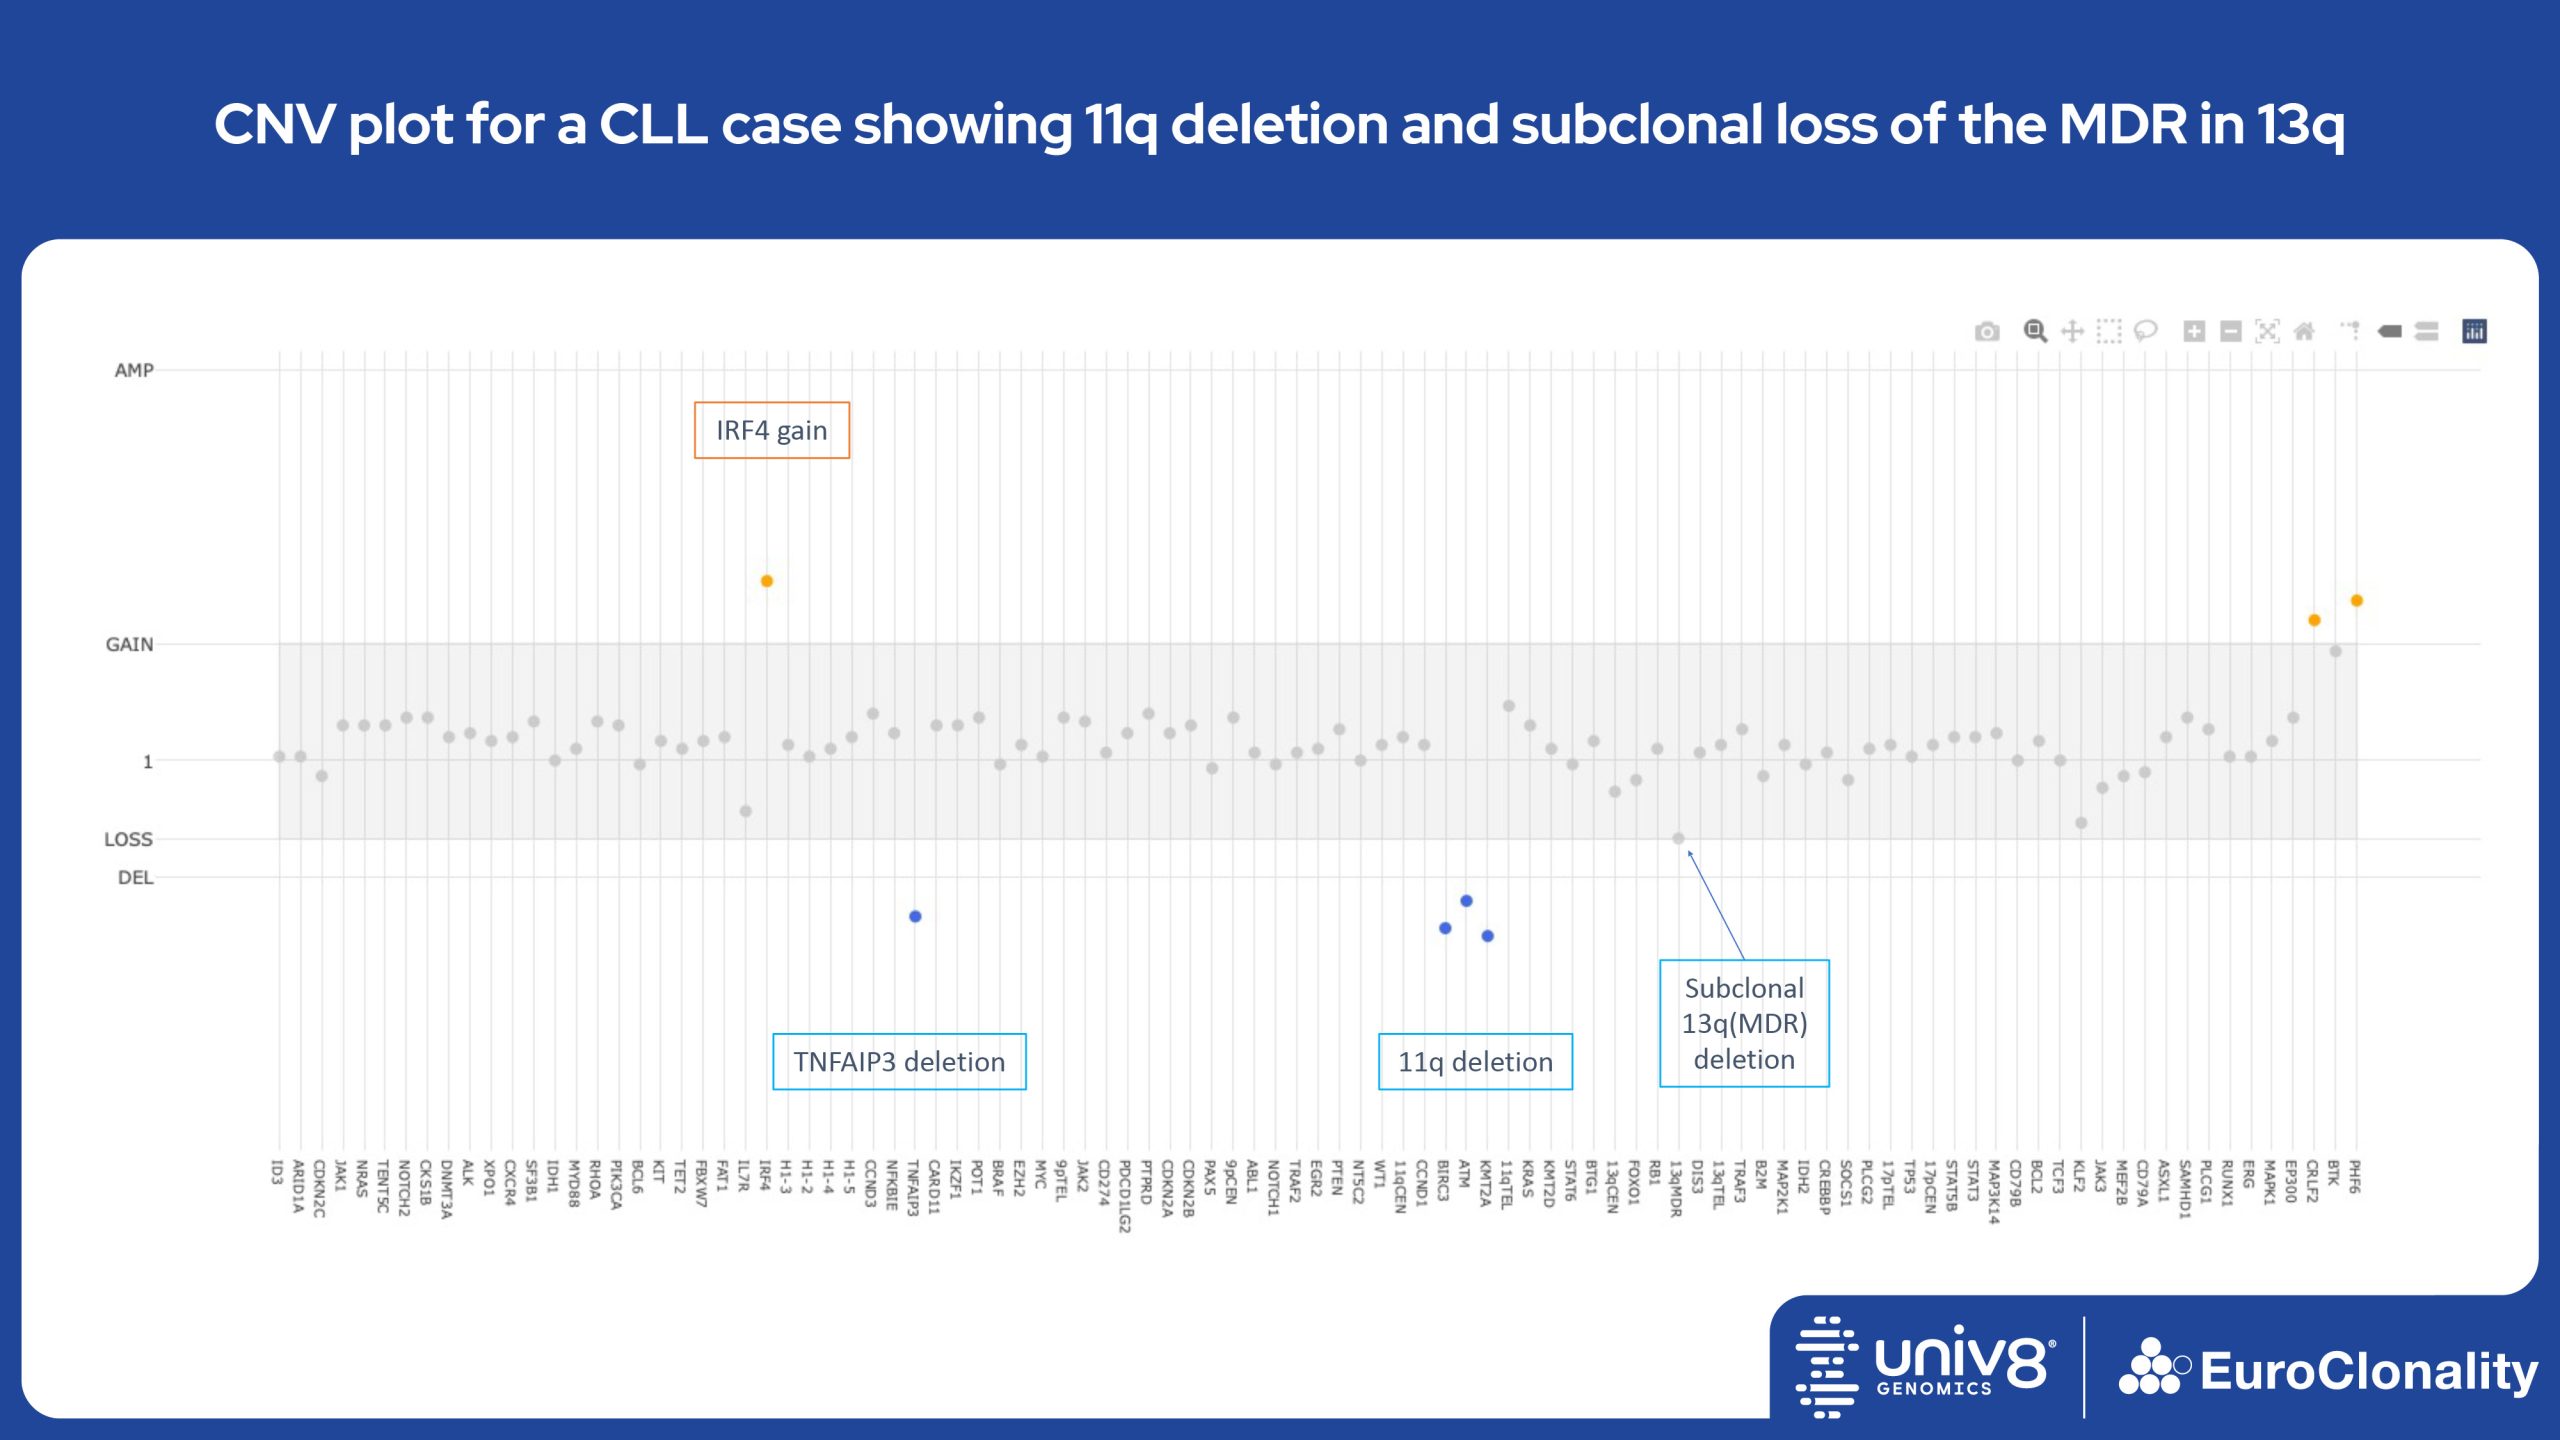 CNV plot for a CLL case showing 11q deletion and subclonal loss of the MDR in 13q